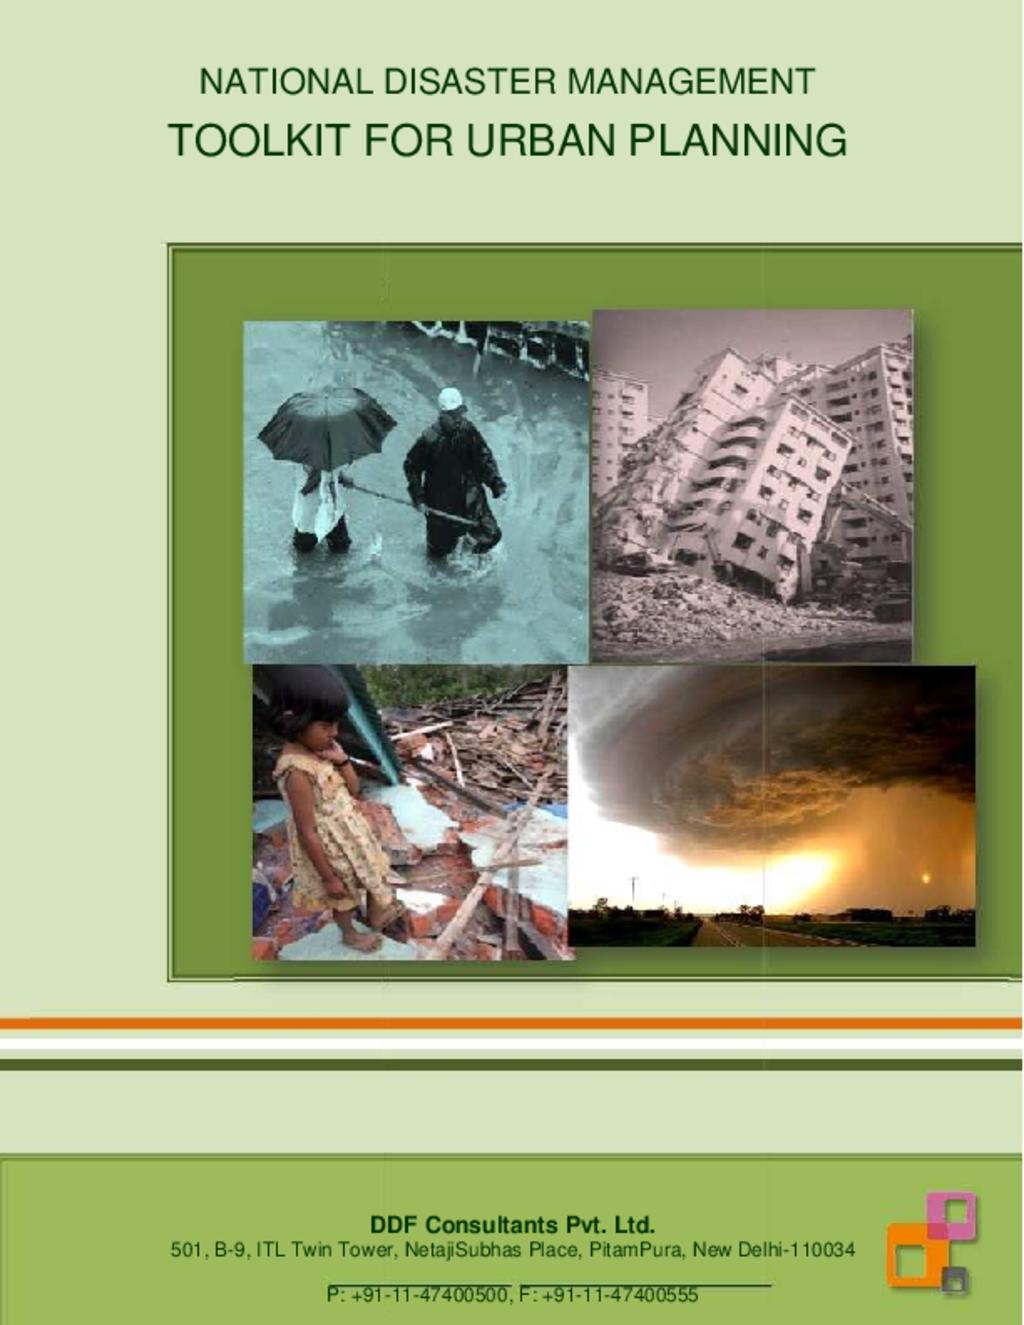 DRR and Urban Toolkit